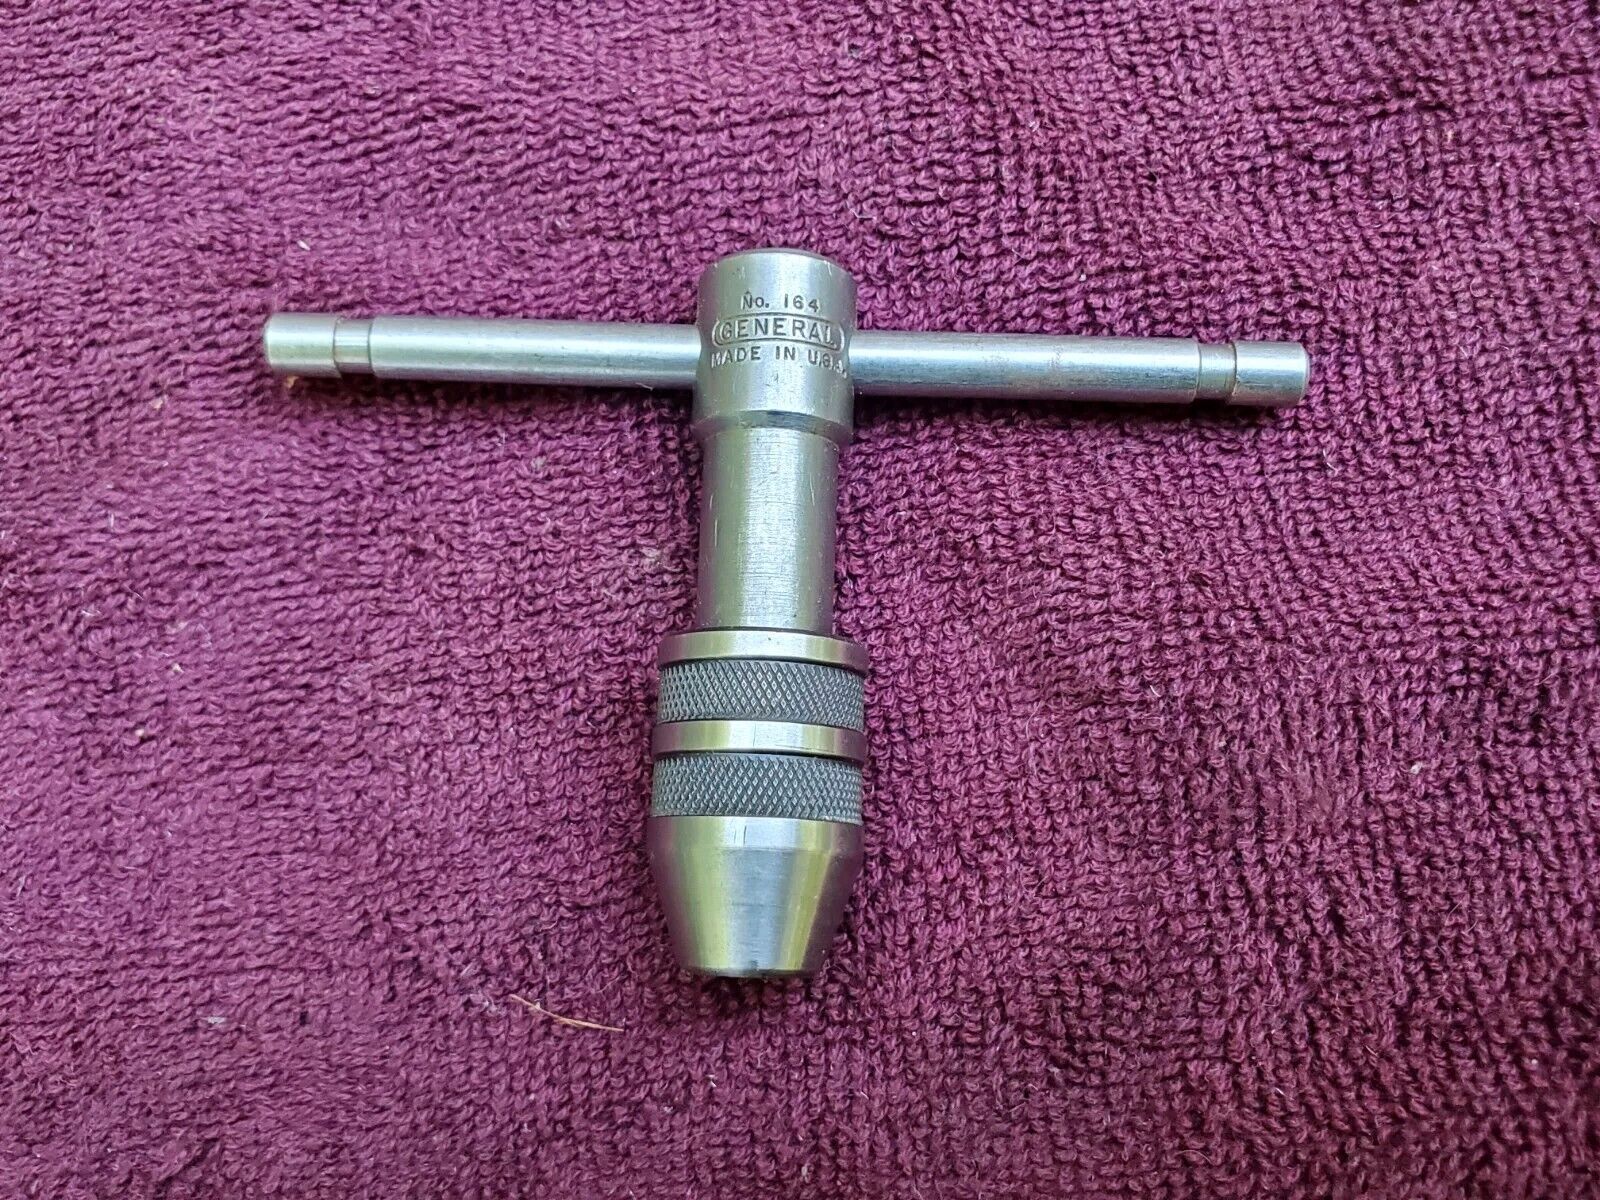 Vintage General Tools No.164 T-Handle Tap Wrench. Made in USA. #2